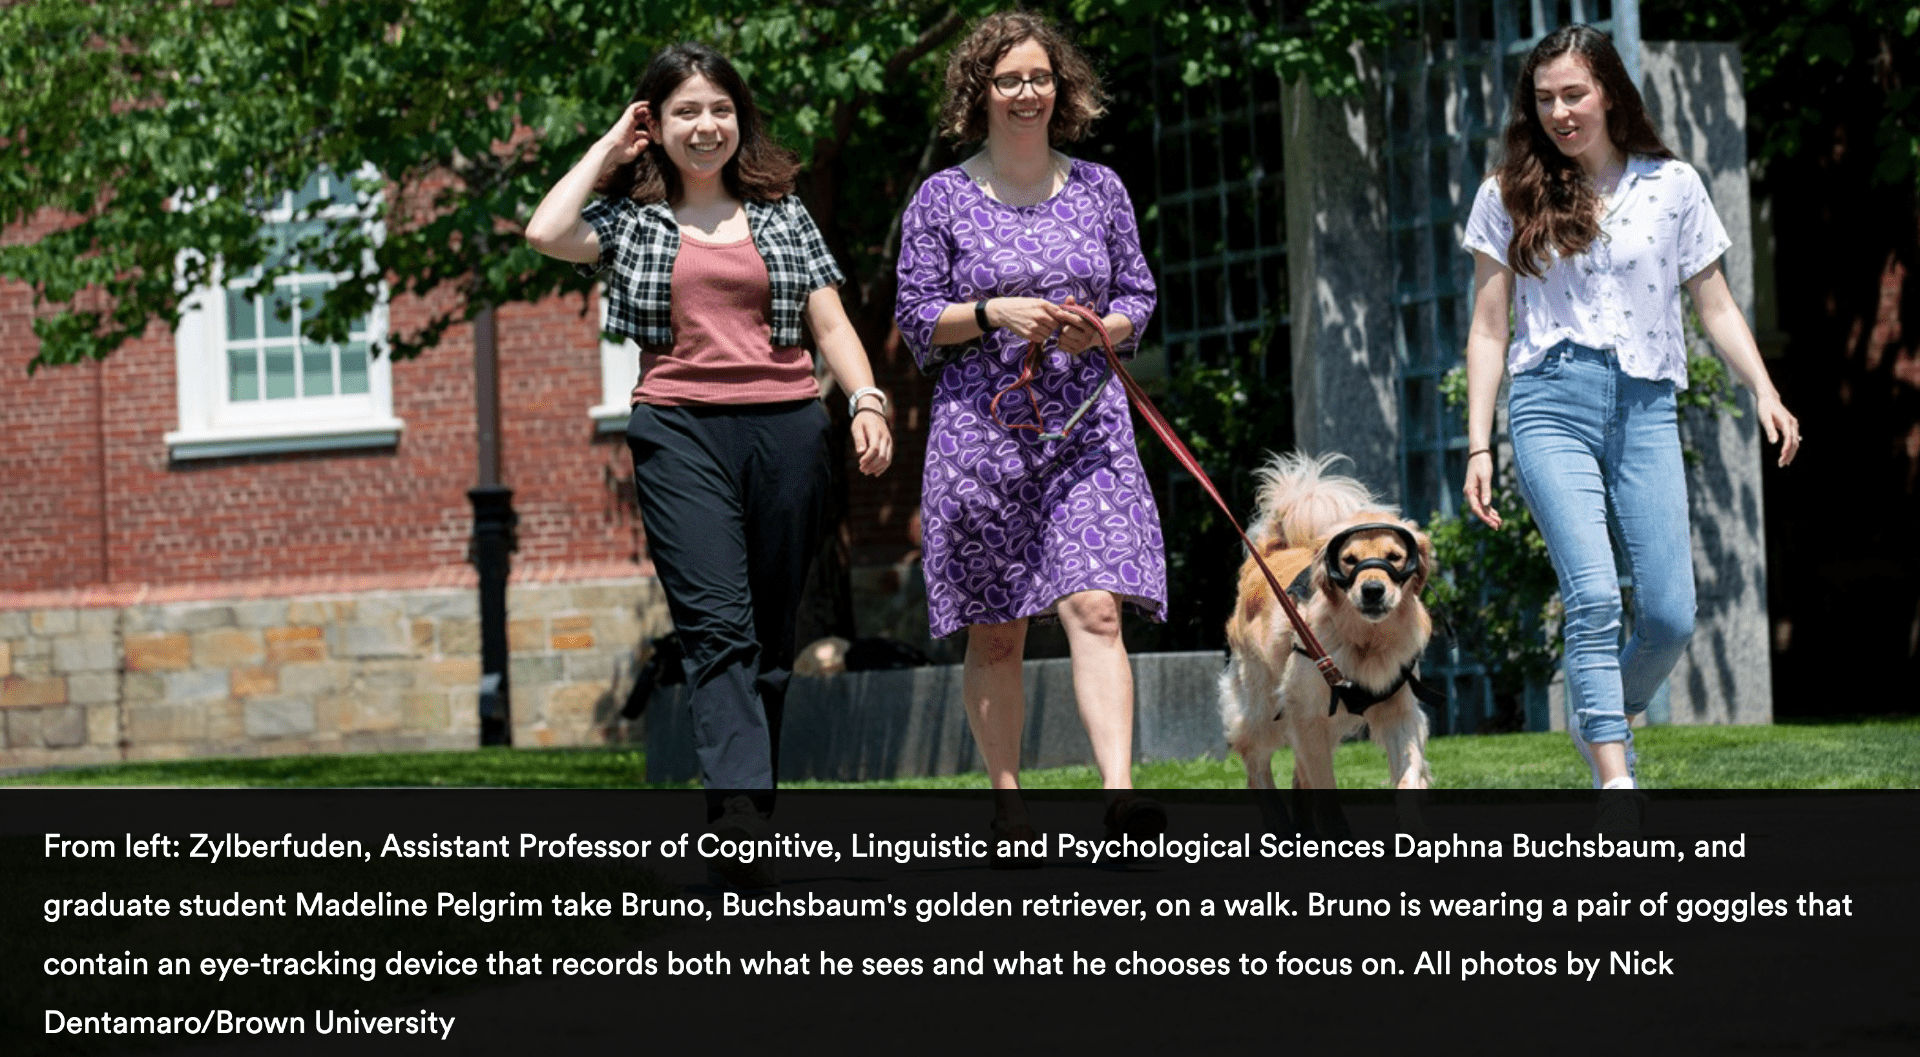 image of Sarah Zylberfuden, Daphna Buchsbaum, and Madeline Pelgrim walking a golden retriever named Bruno. Bruno is wearing goggles used for the eye-tracking project described in the Brown News article.